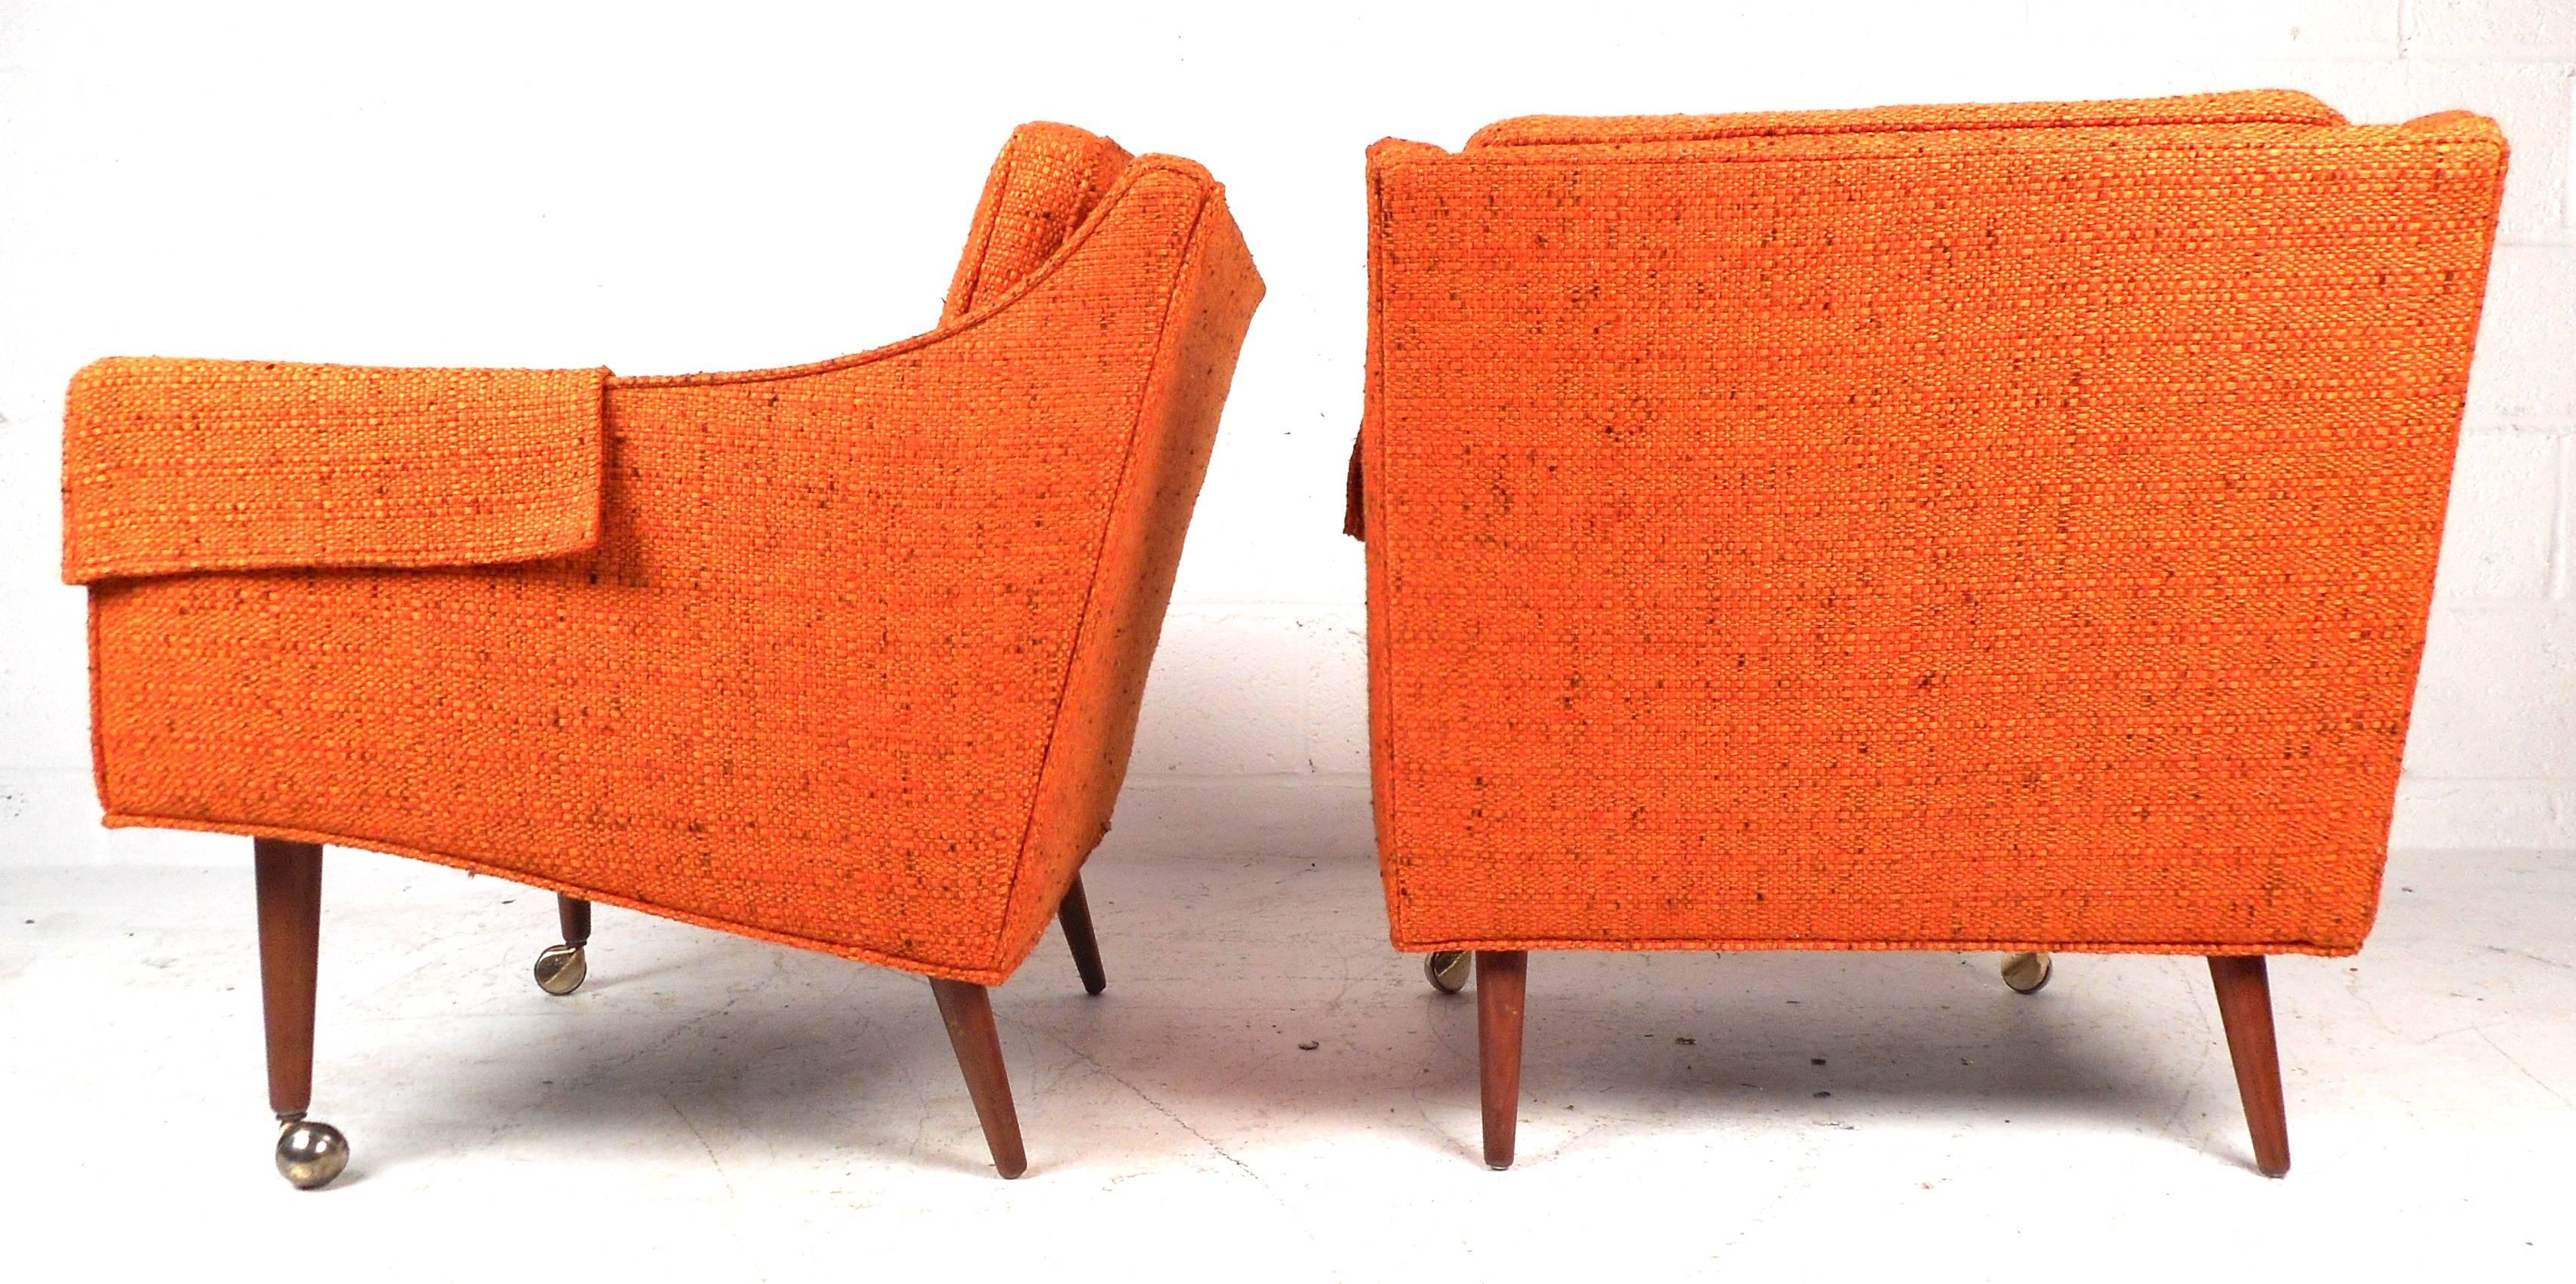 American Set of Milo Baughman Lounge Chairs for Thayer Coggin